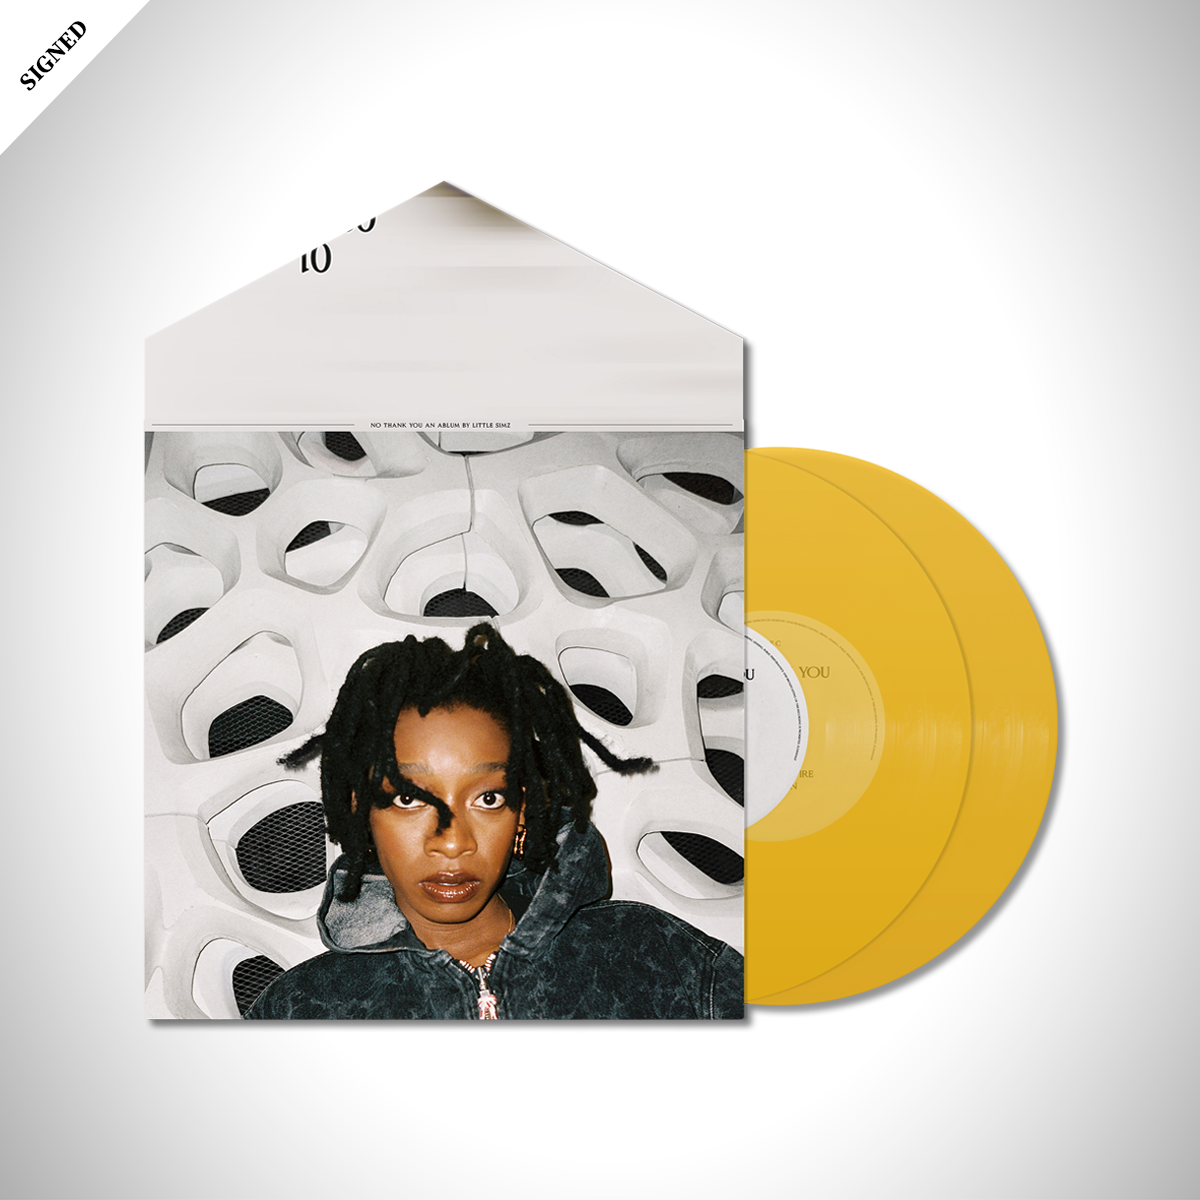 No Thank You Exclusive [YELLOW] Vinyl 2xLP + Signed Insert